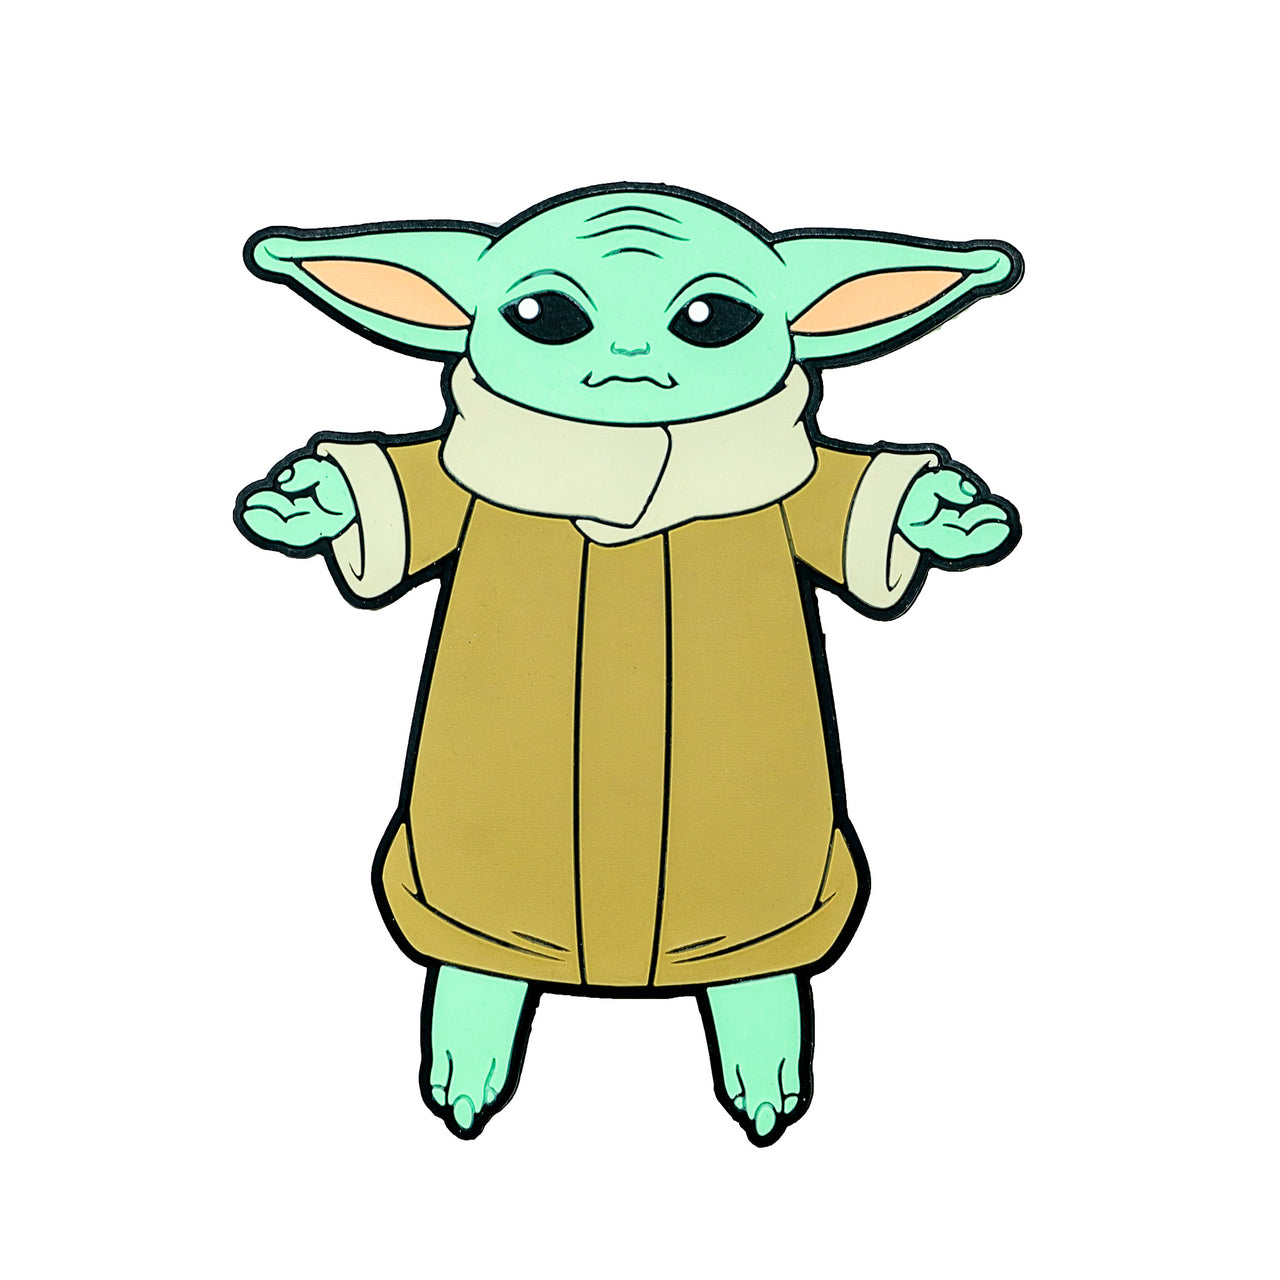 Image of Star Wars the Mandalorian Grogu Hug Buddy on a white background with arms and legs spread open